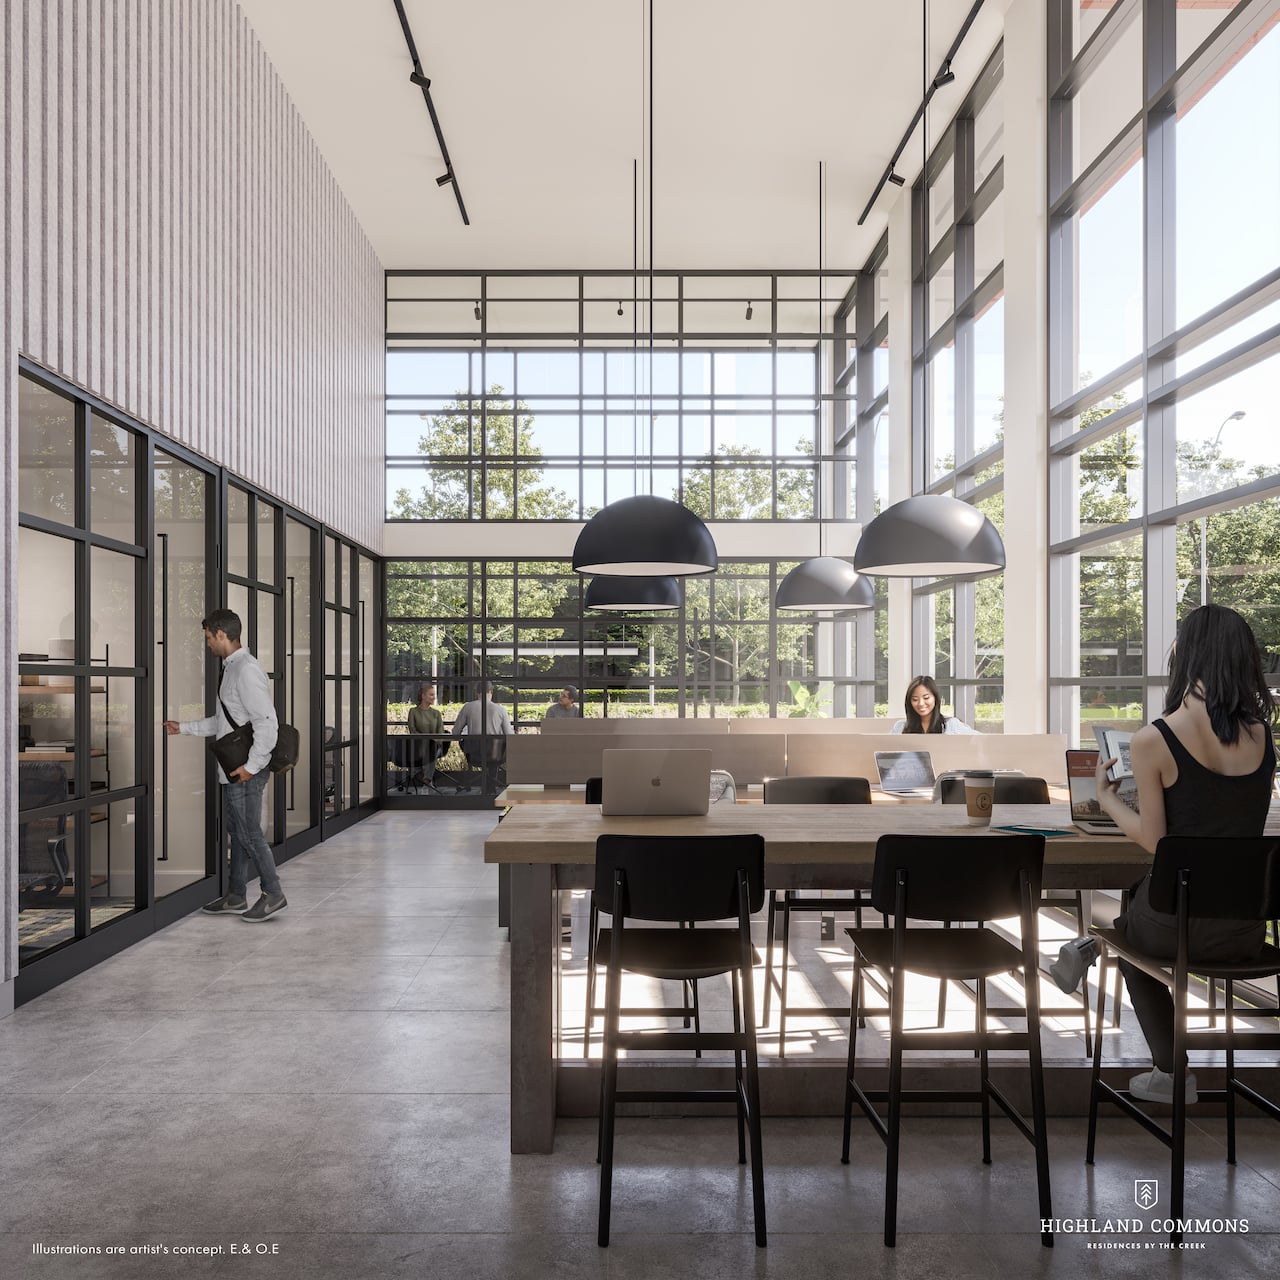 Rendering of Highland Commons condos co-working space